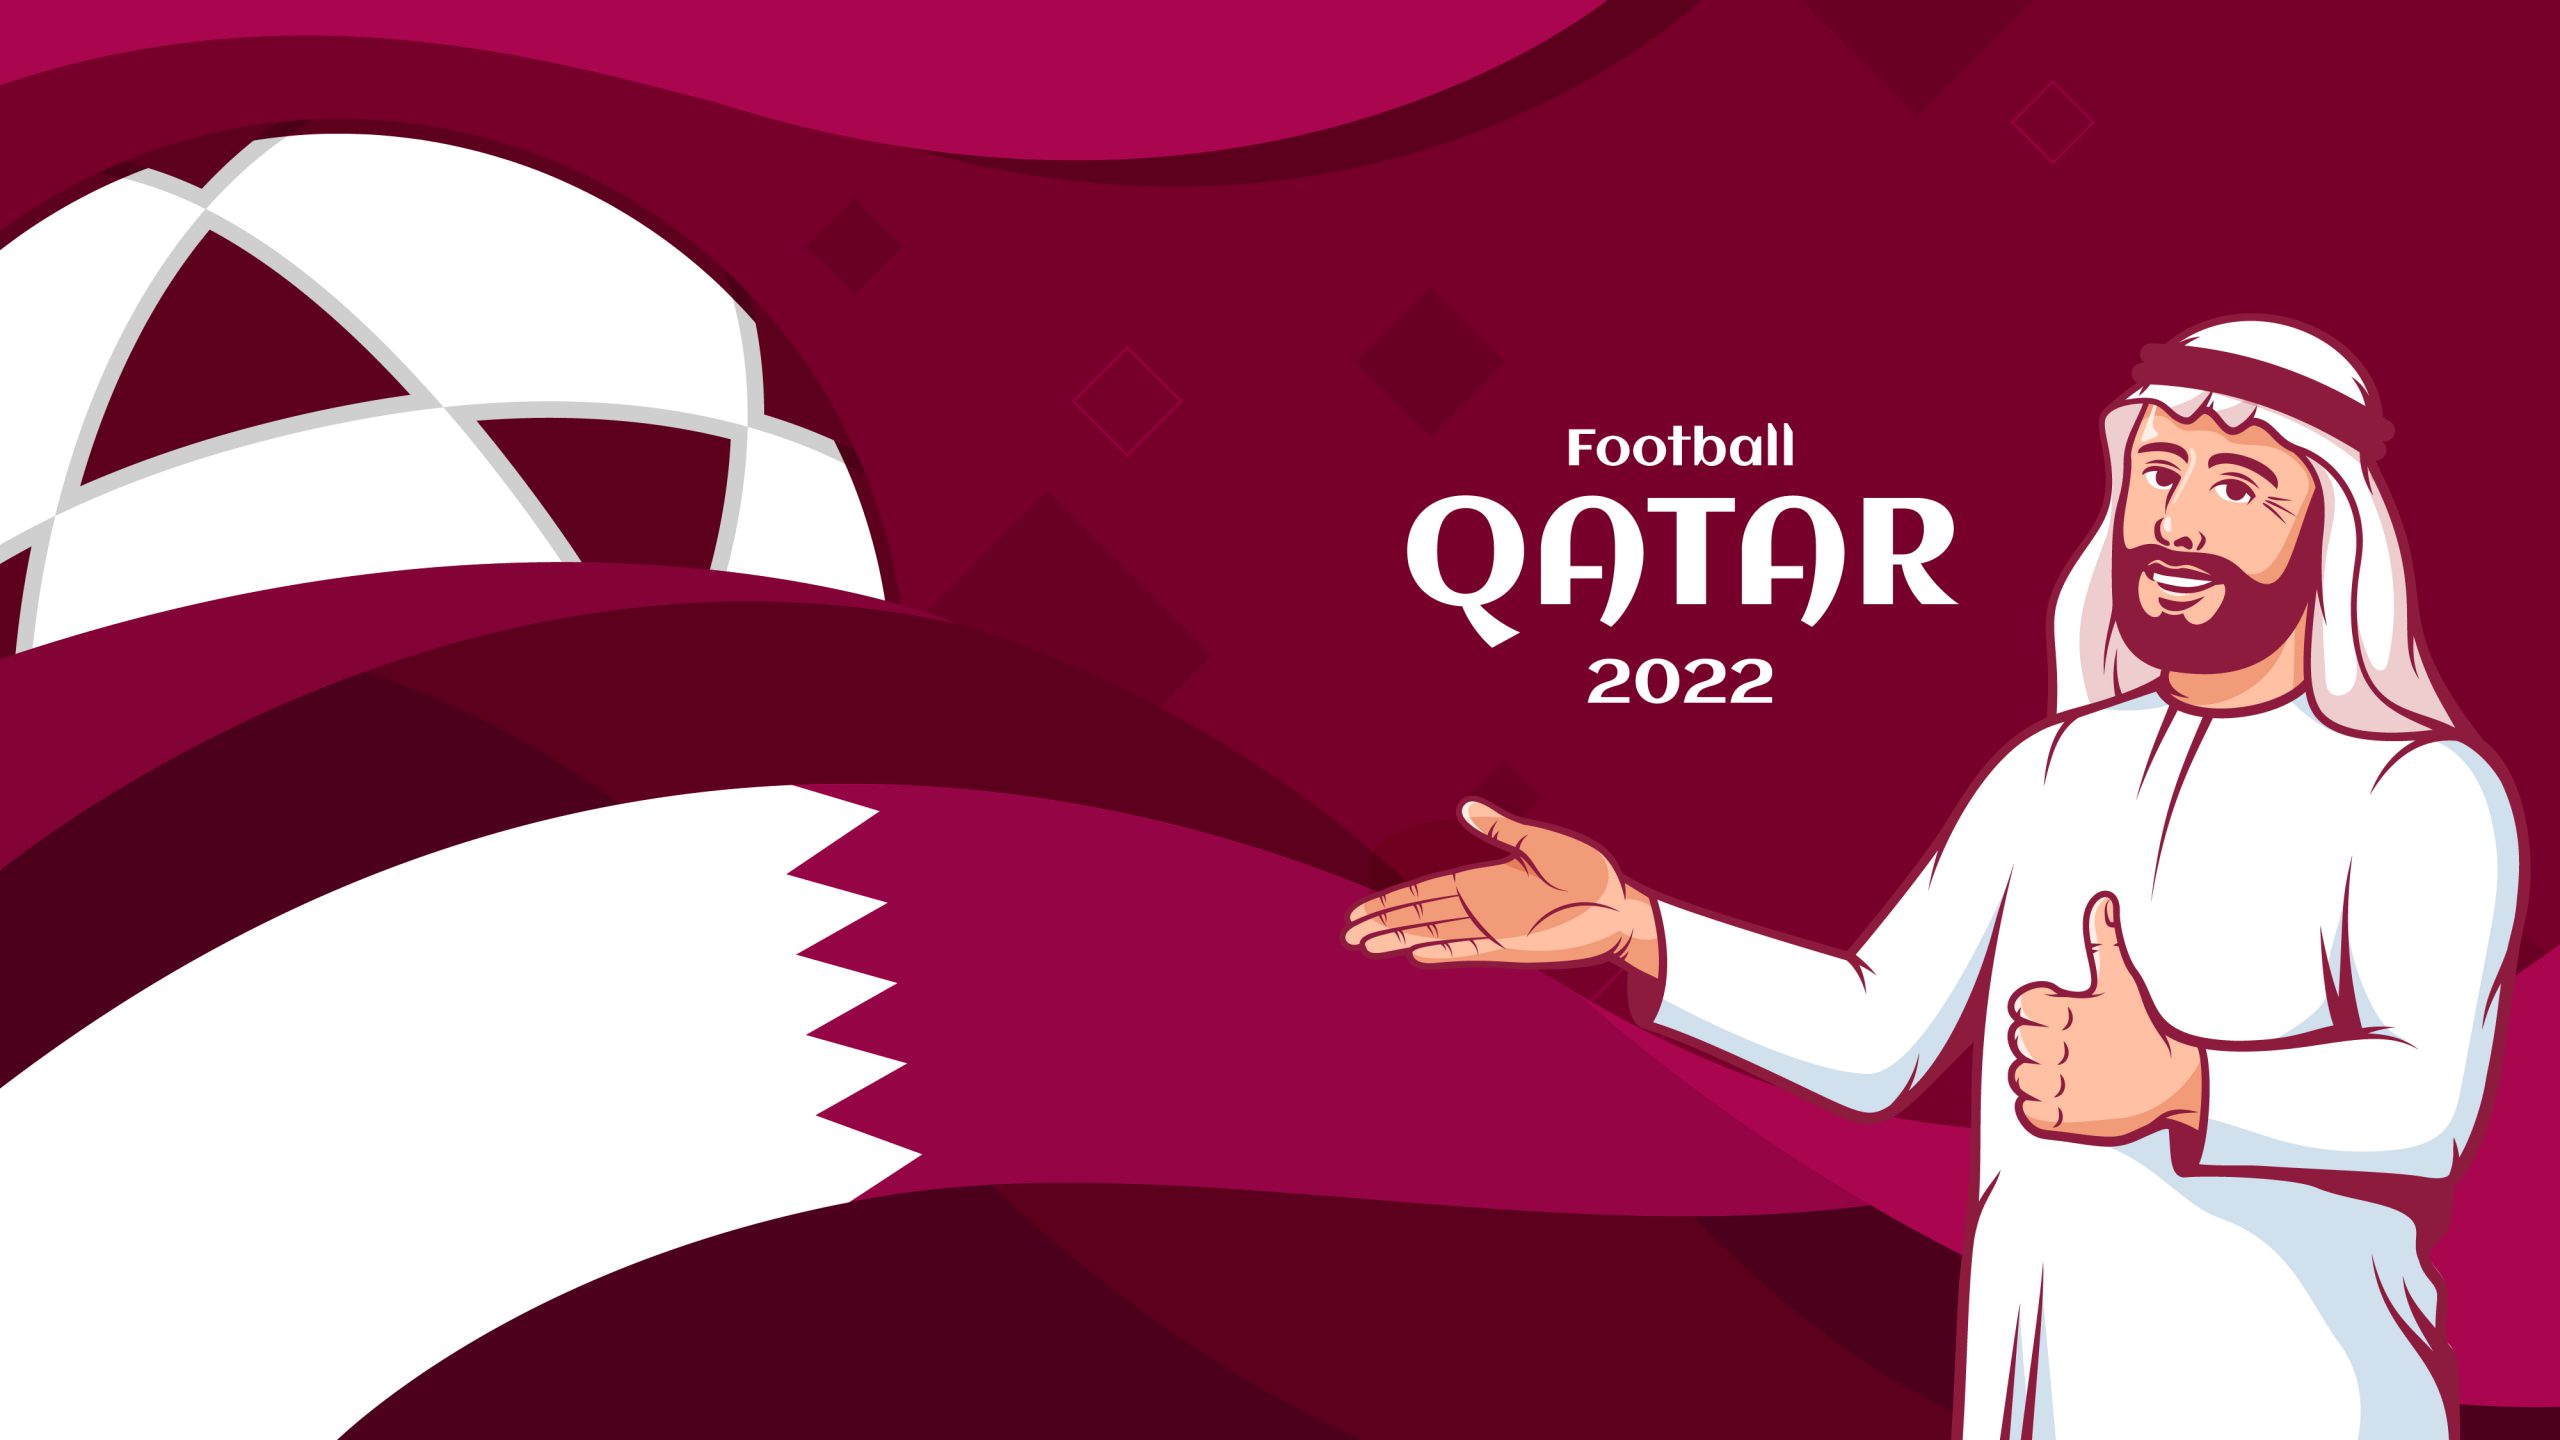 FIFA world cup 2022: Qatari Football Fan Makes History with Record-Breaking Attendance at World Cup